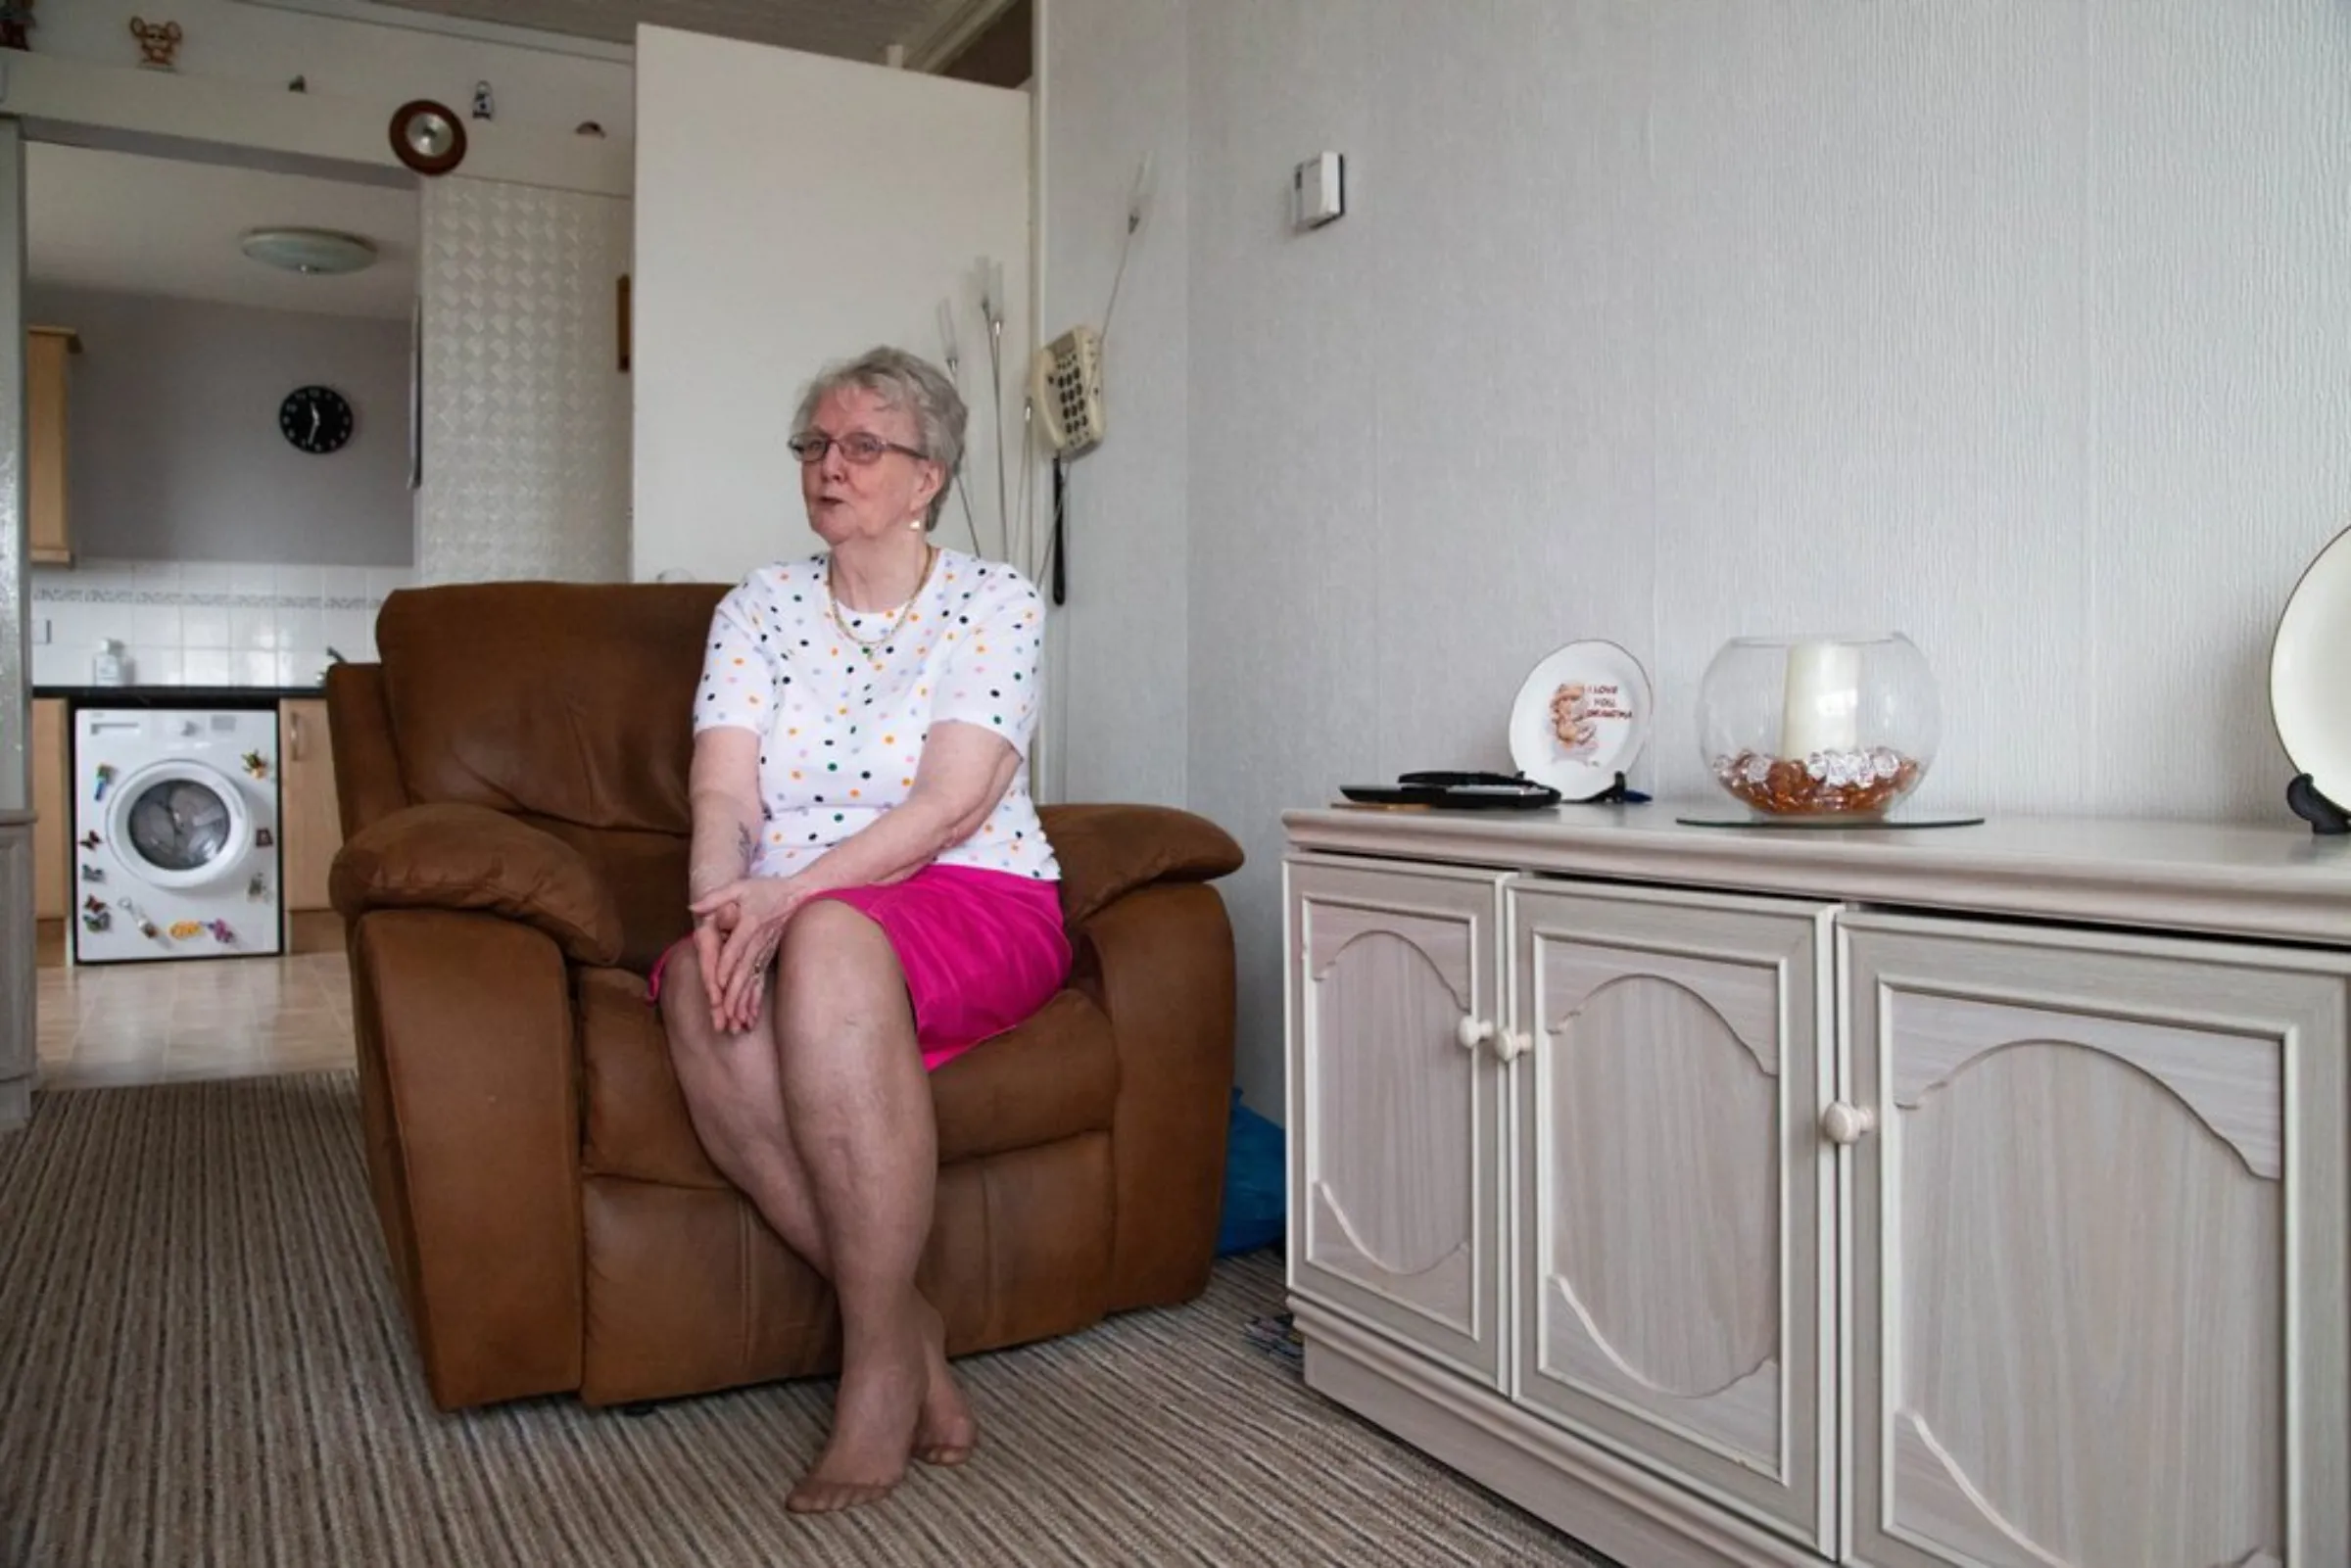 Social housing tenant Margaret Galloway, 77, sits in her home in Glasgow, United Kingdom, July 22, 2021. Galloway said high fuel costs meant some nights she could not afford to cook a full meal before her housing association installed higher-efficiency green energy systems